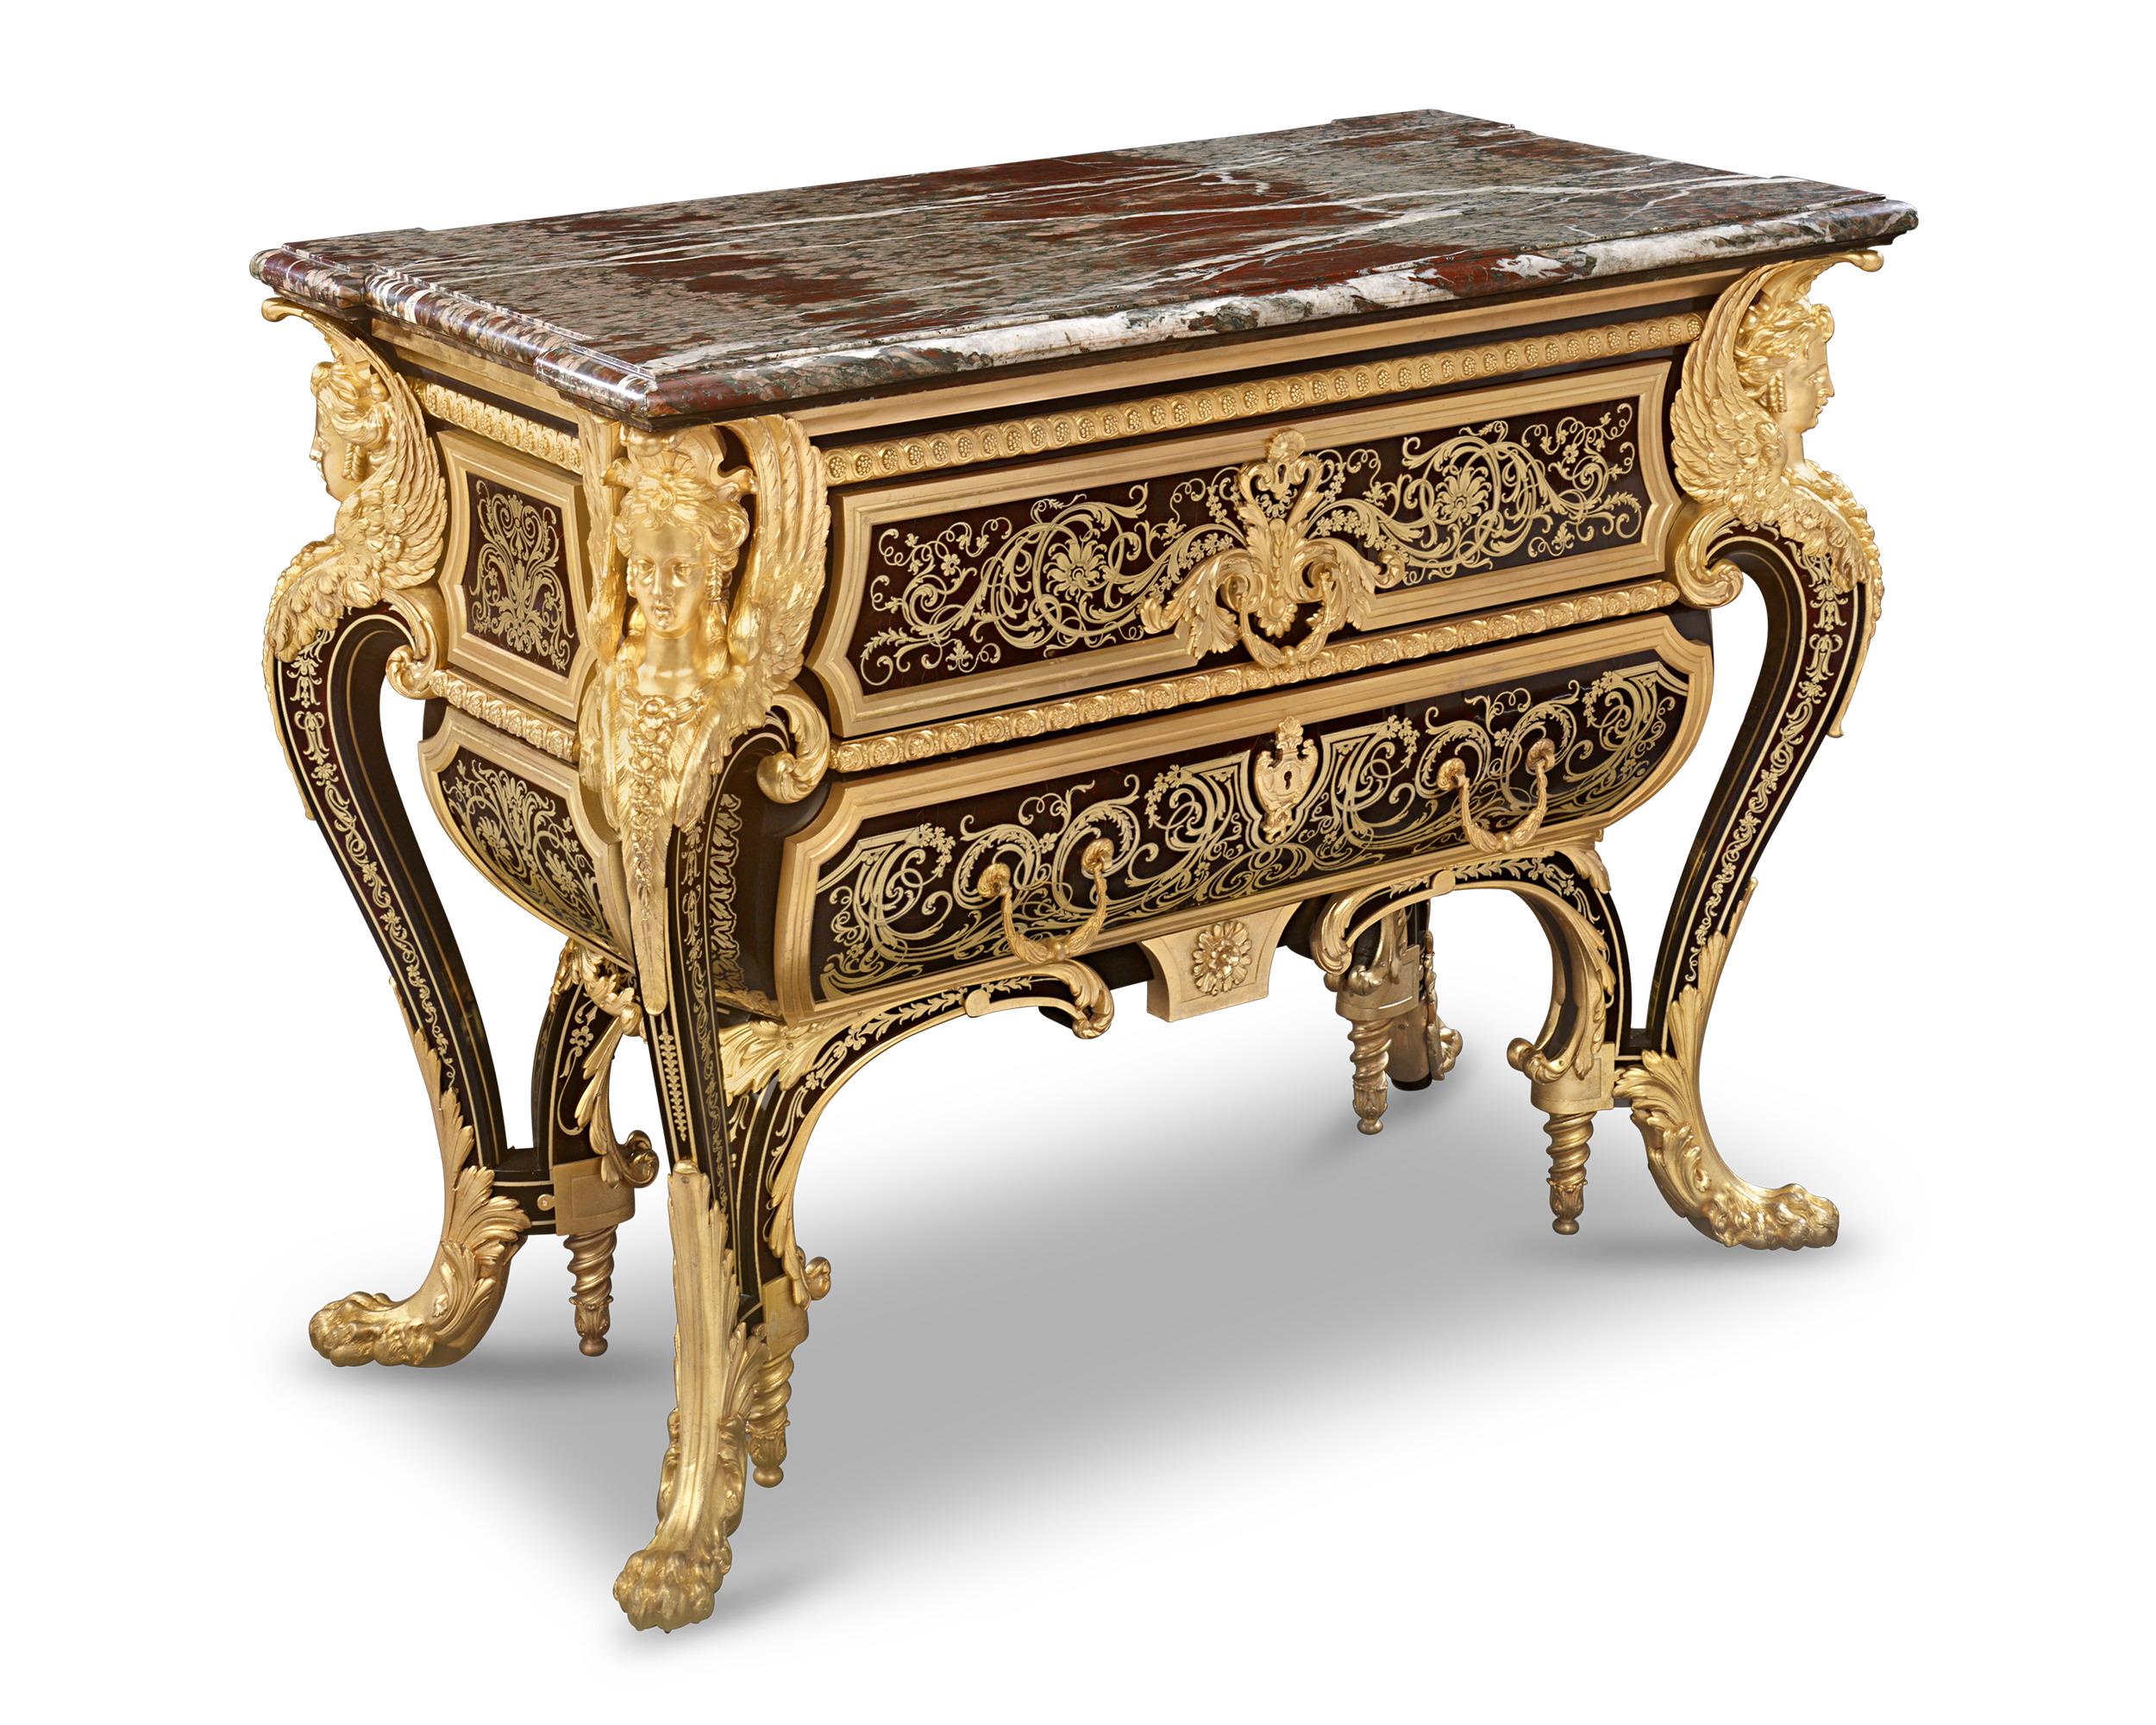 This monumental Boulle commode was crafted by Robert Blake, one of the finest and most important English cabinetmakers of his time. It is modeled after the legendary pair of commodes made for France’s King Louis XIV by master ébéniste André-Charles